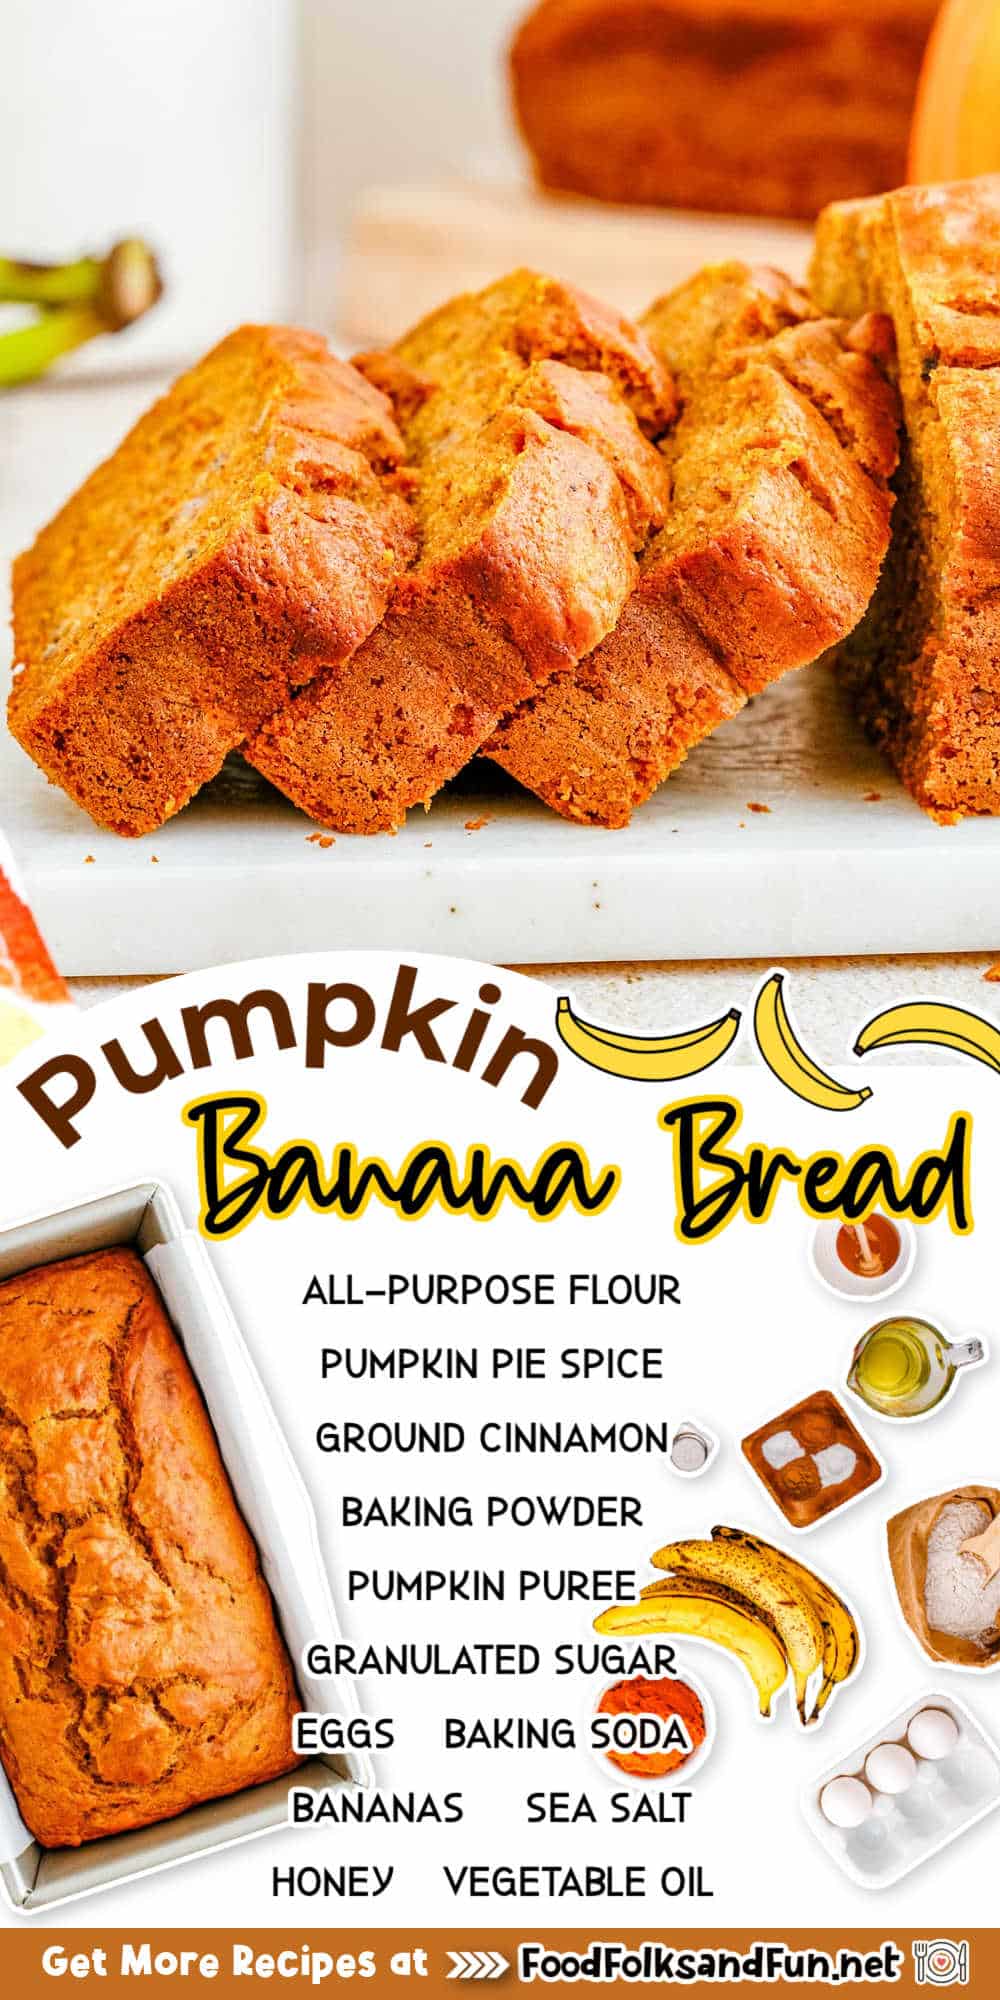 Enjoy a moist and delicious twist on a seasonal favorite with Pumpkin Banana Bread. It's spiced just right and perfect year-round!  via @foodfolksandfun